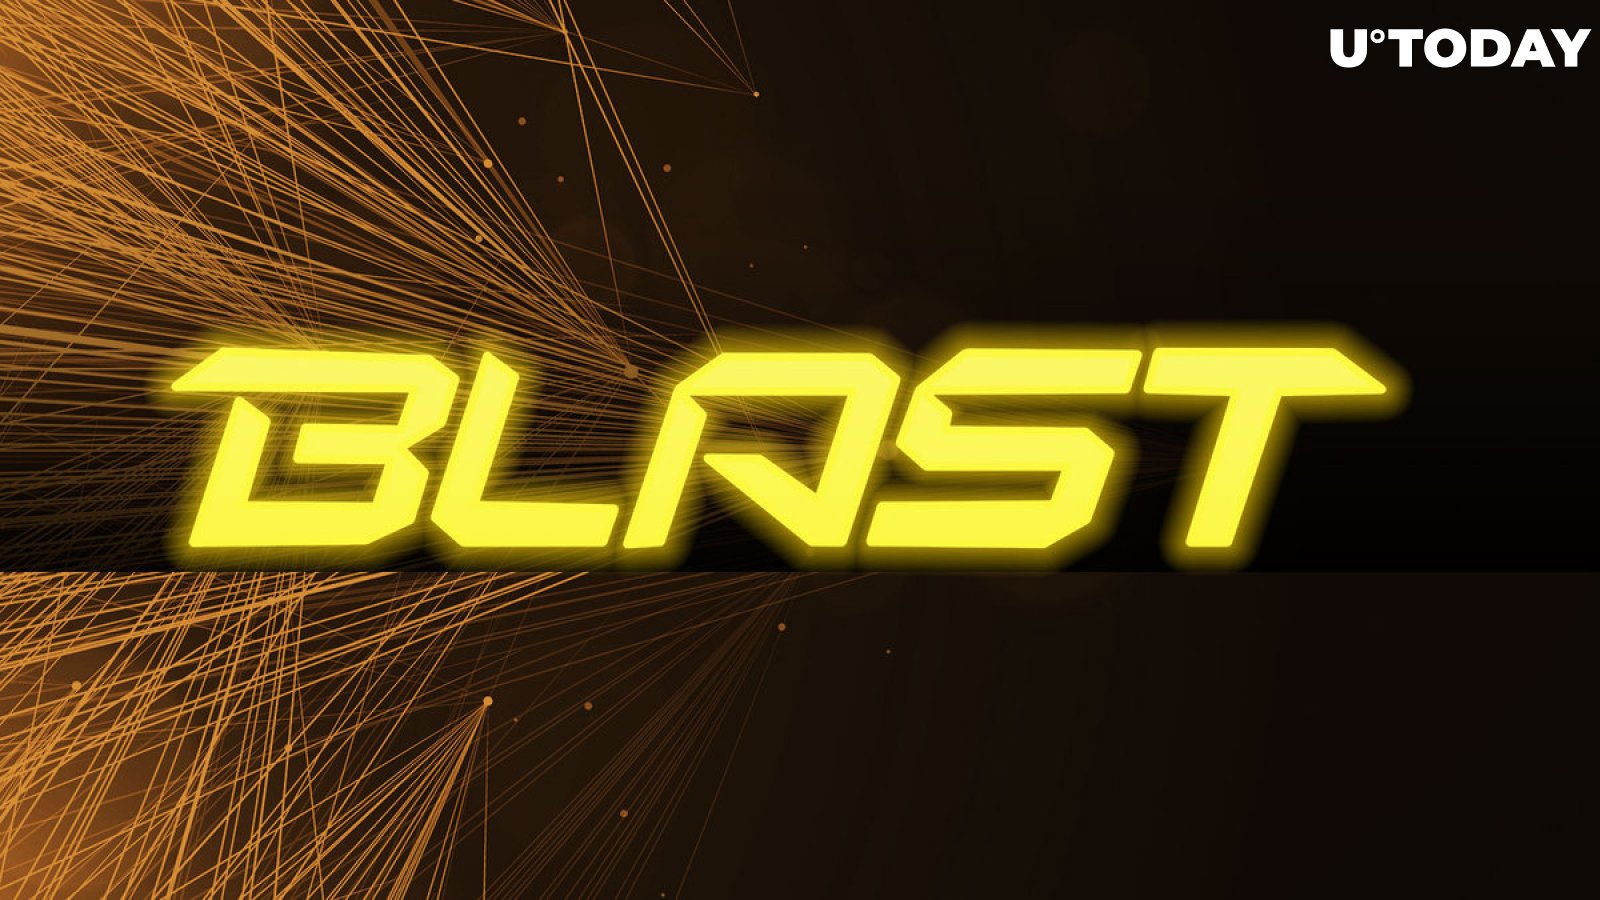 What Is Blast? Ethereum Staking L2 That Spiked by 20,000% in TVL